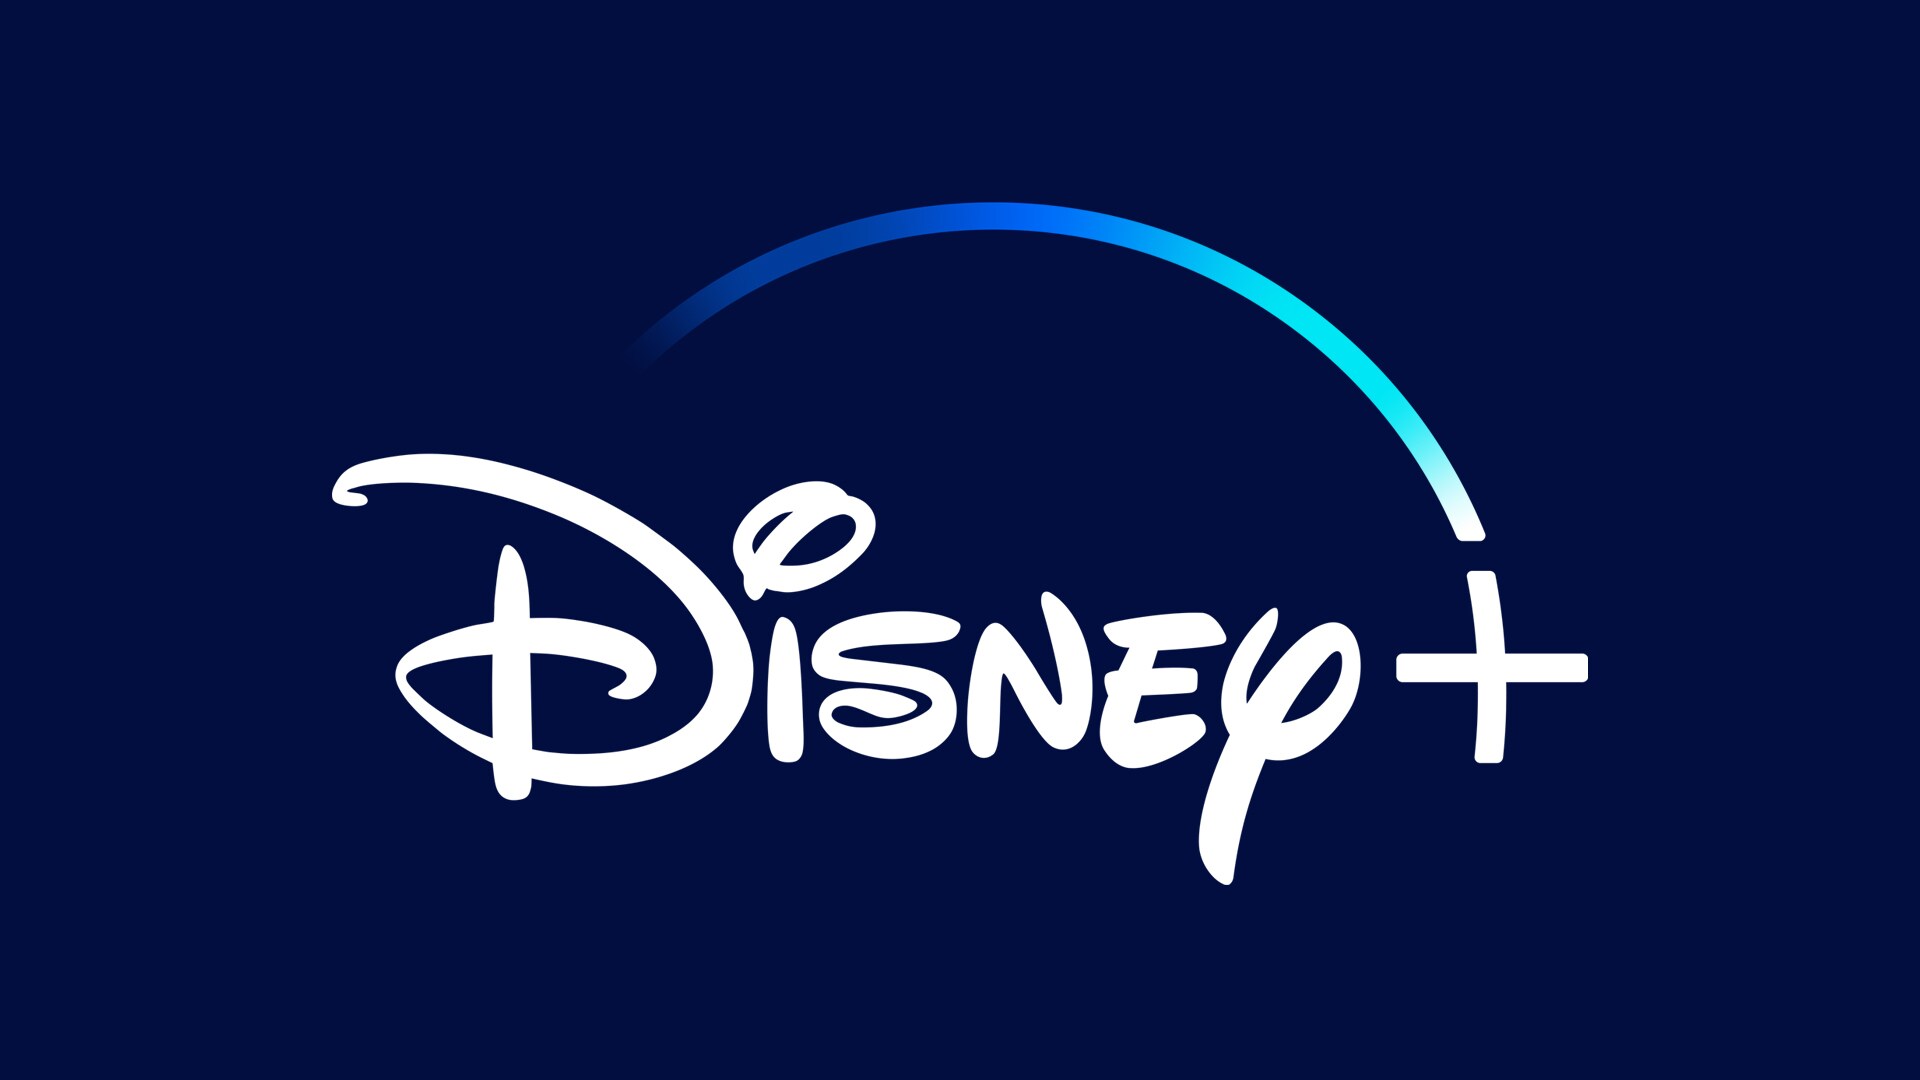 IT’S HERE! DISNEY+ IS OFFICIALLY LIVE ACROSS THE MIDDLE EAST AND NORTH AFRICA